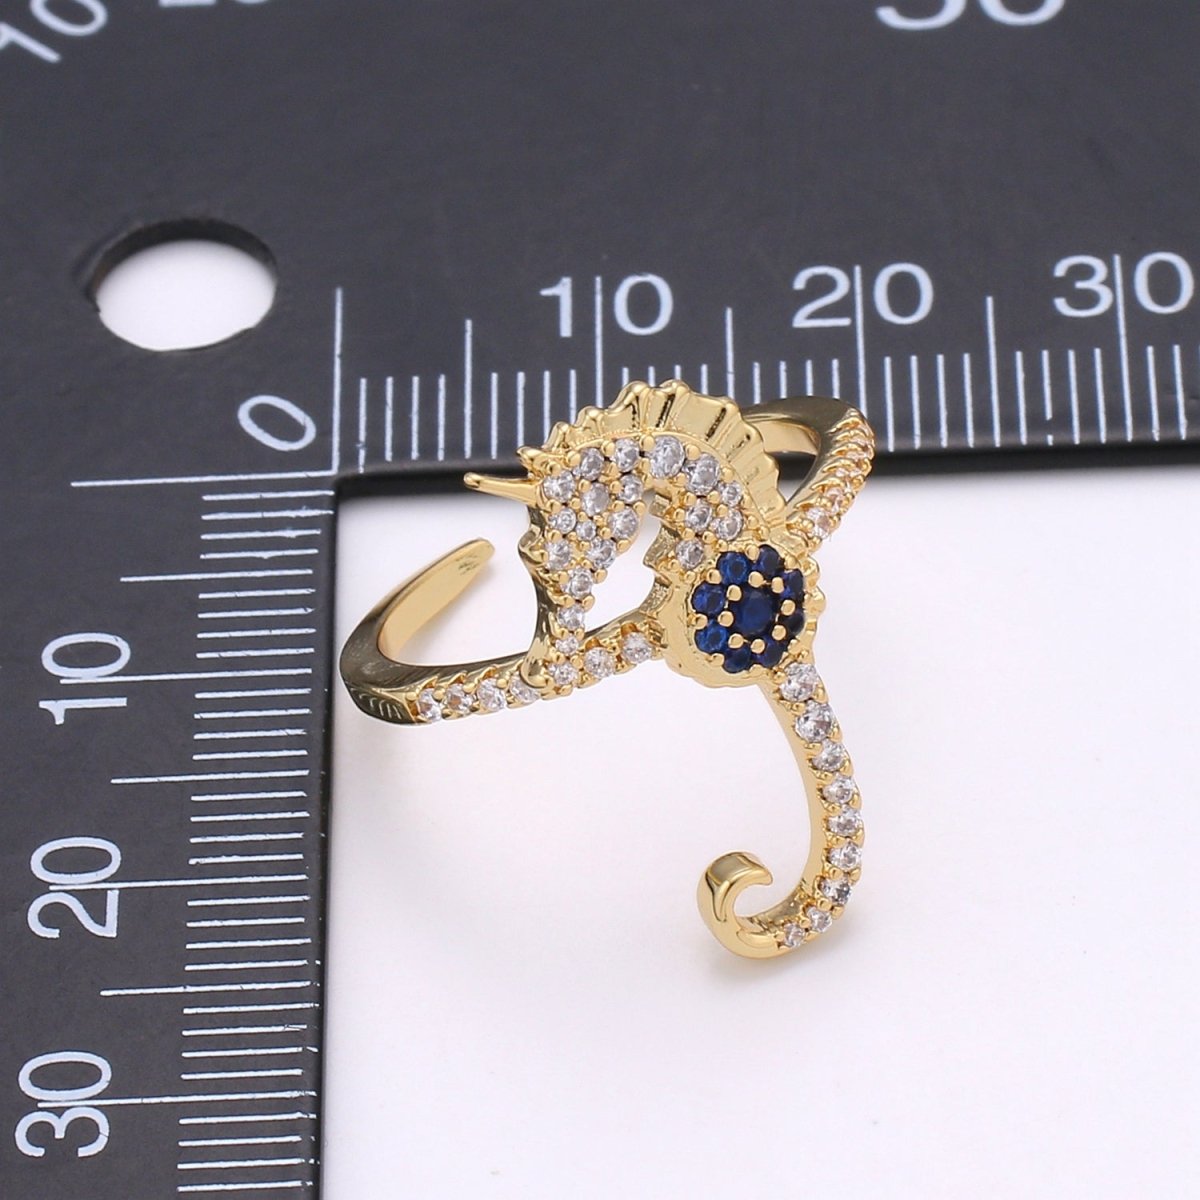 Cz Sea horse ring, Gold seahorse ring, stackable Animal ring Under the Sea Jewelry Inspired Accessory R-196 - DLUXCA